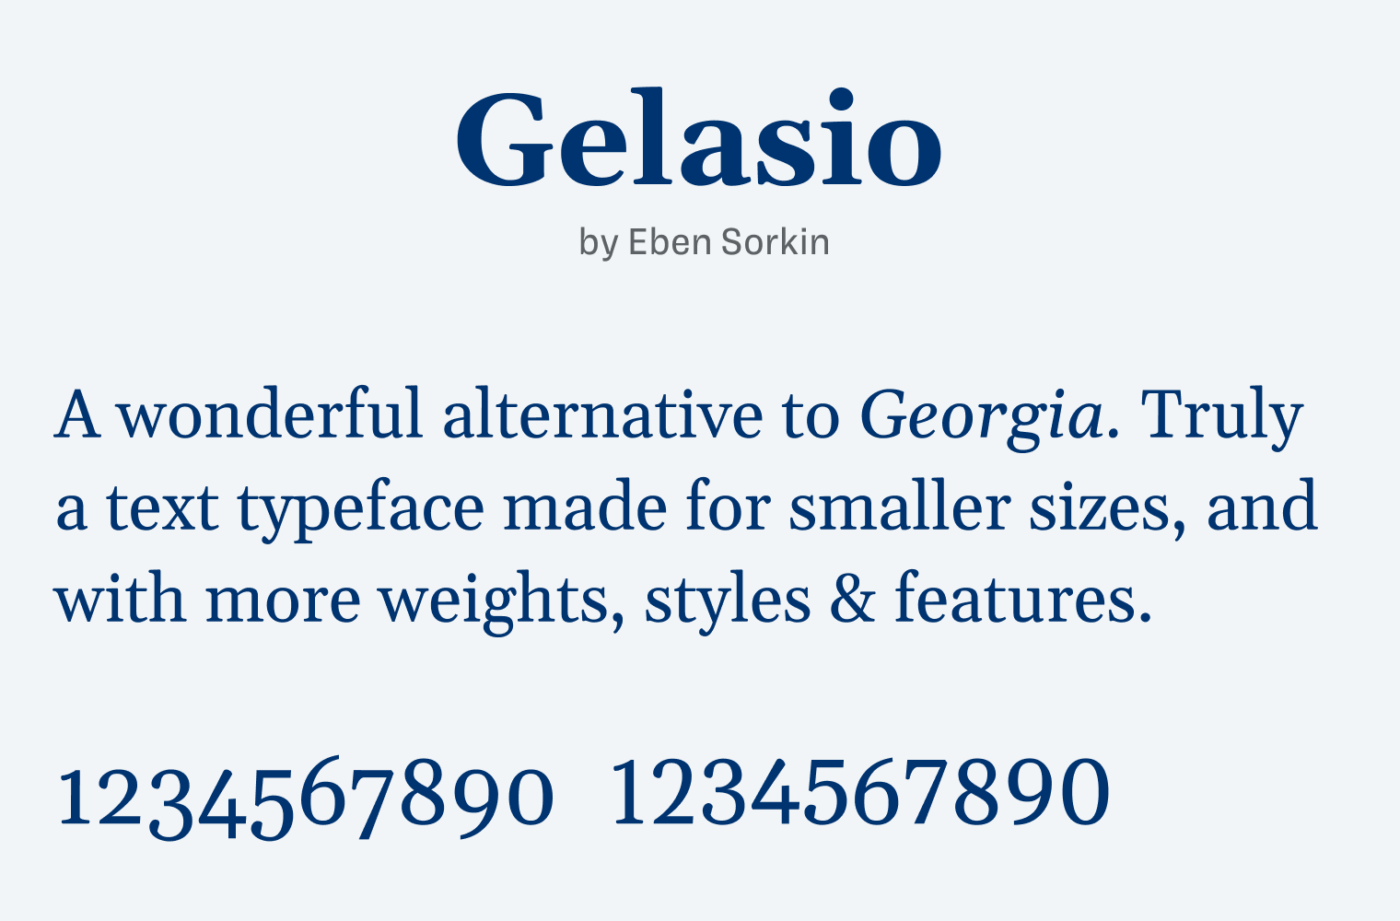 Gelasio
by Eben Sorkin
A wonderful alternative to Georgia. Truly a text typeface made for smaller sizes, and with more weights, styles & features.